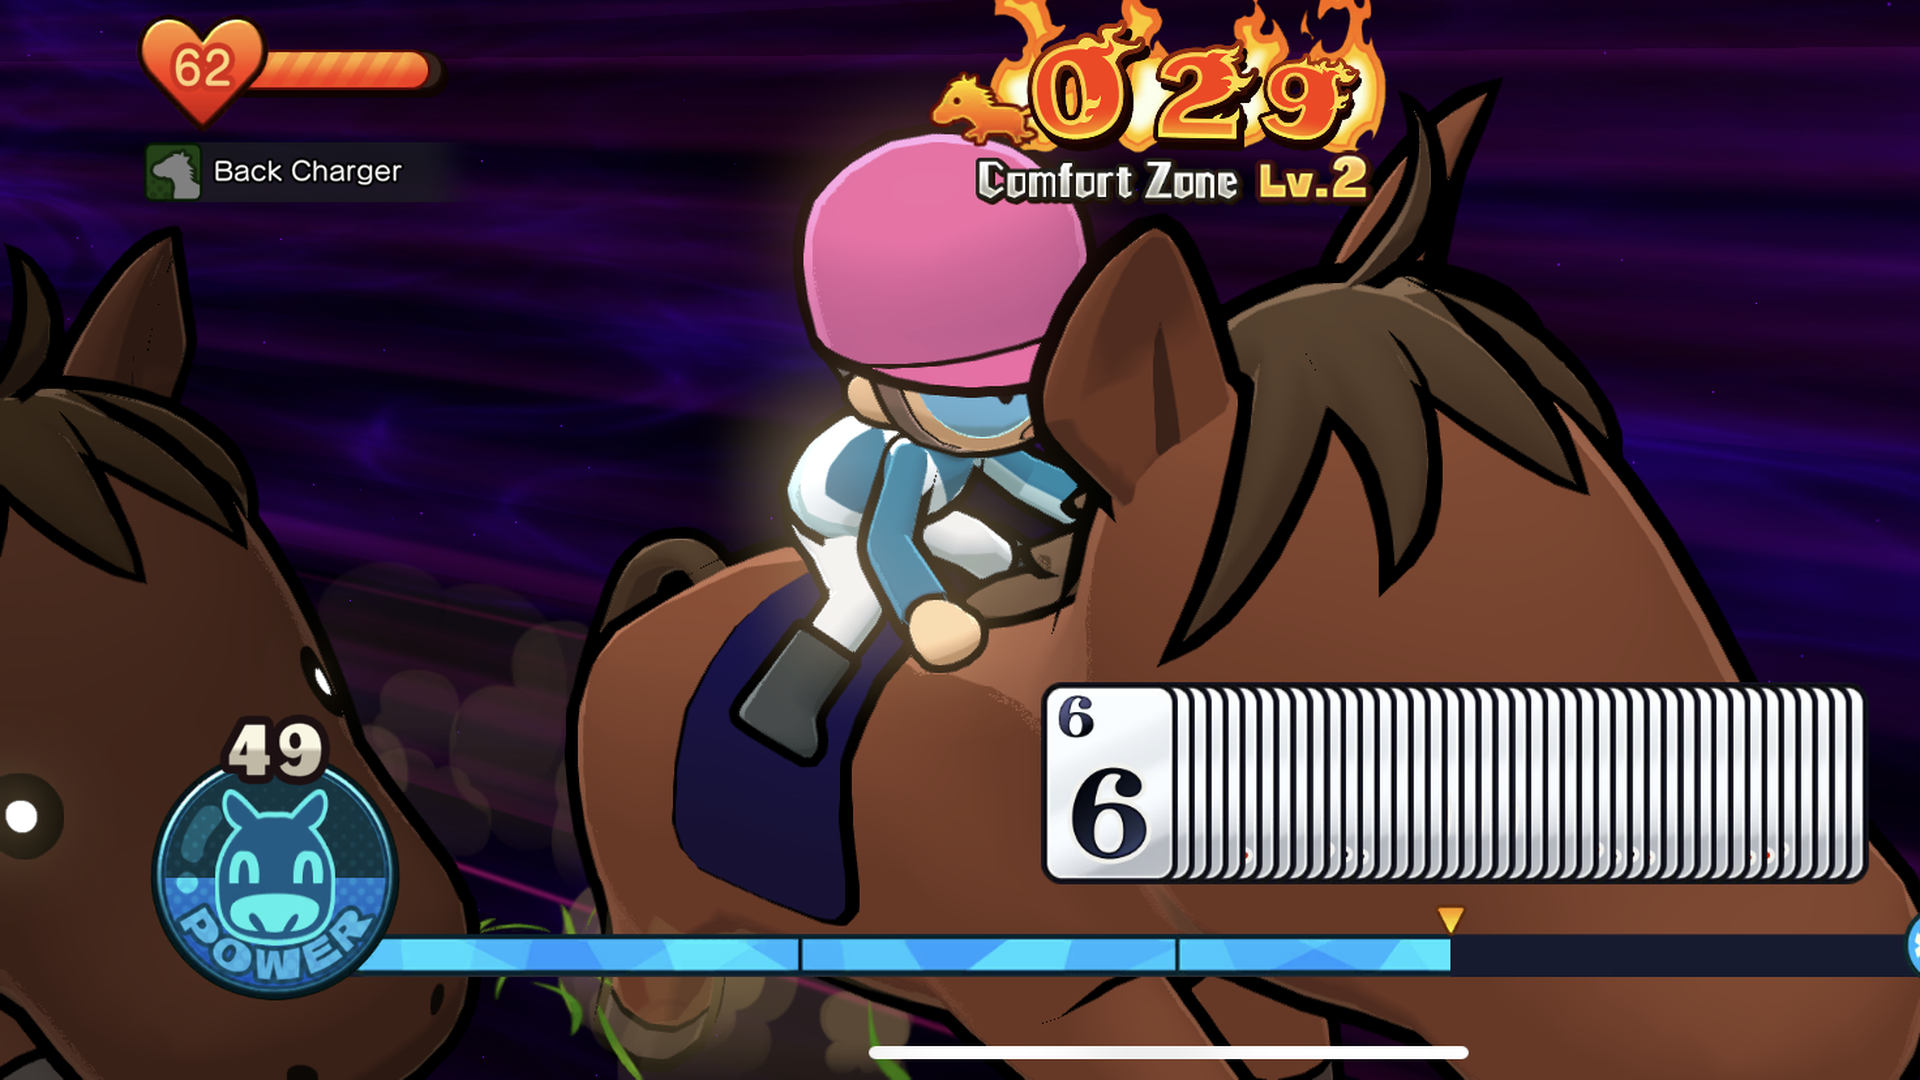 Video game screenshot of a jockey on a horse with playing cards overlaid on the screen